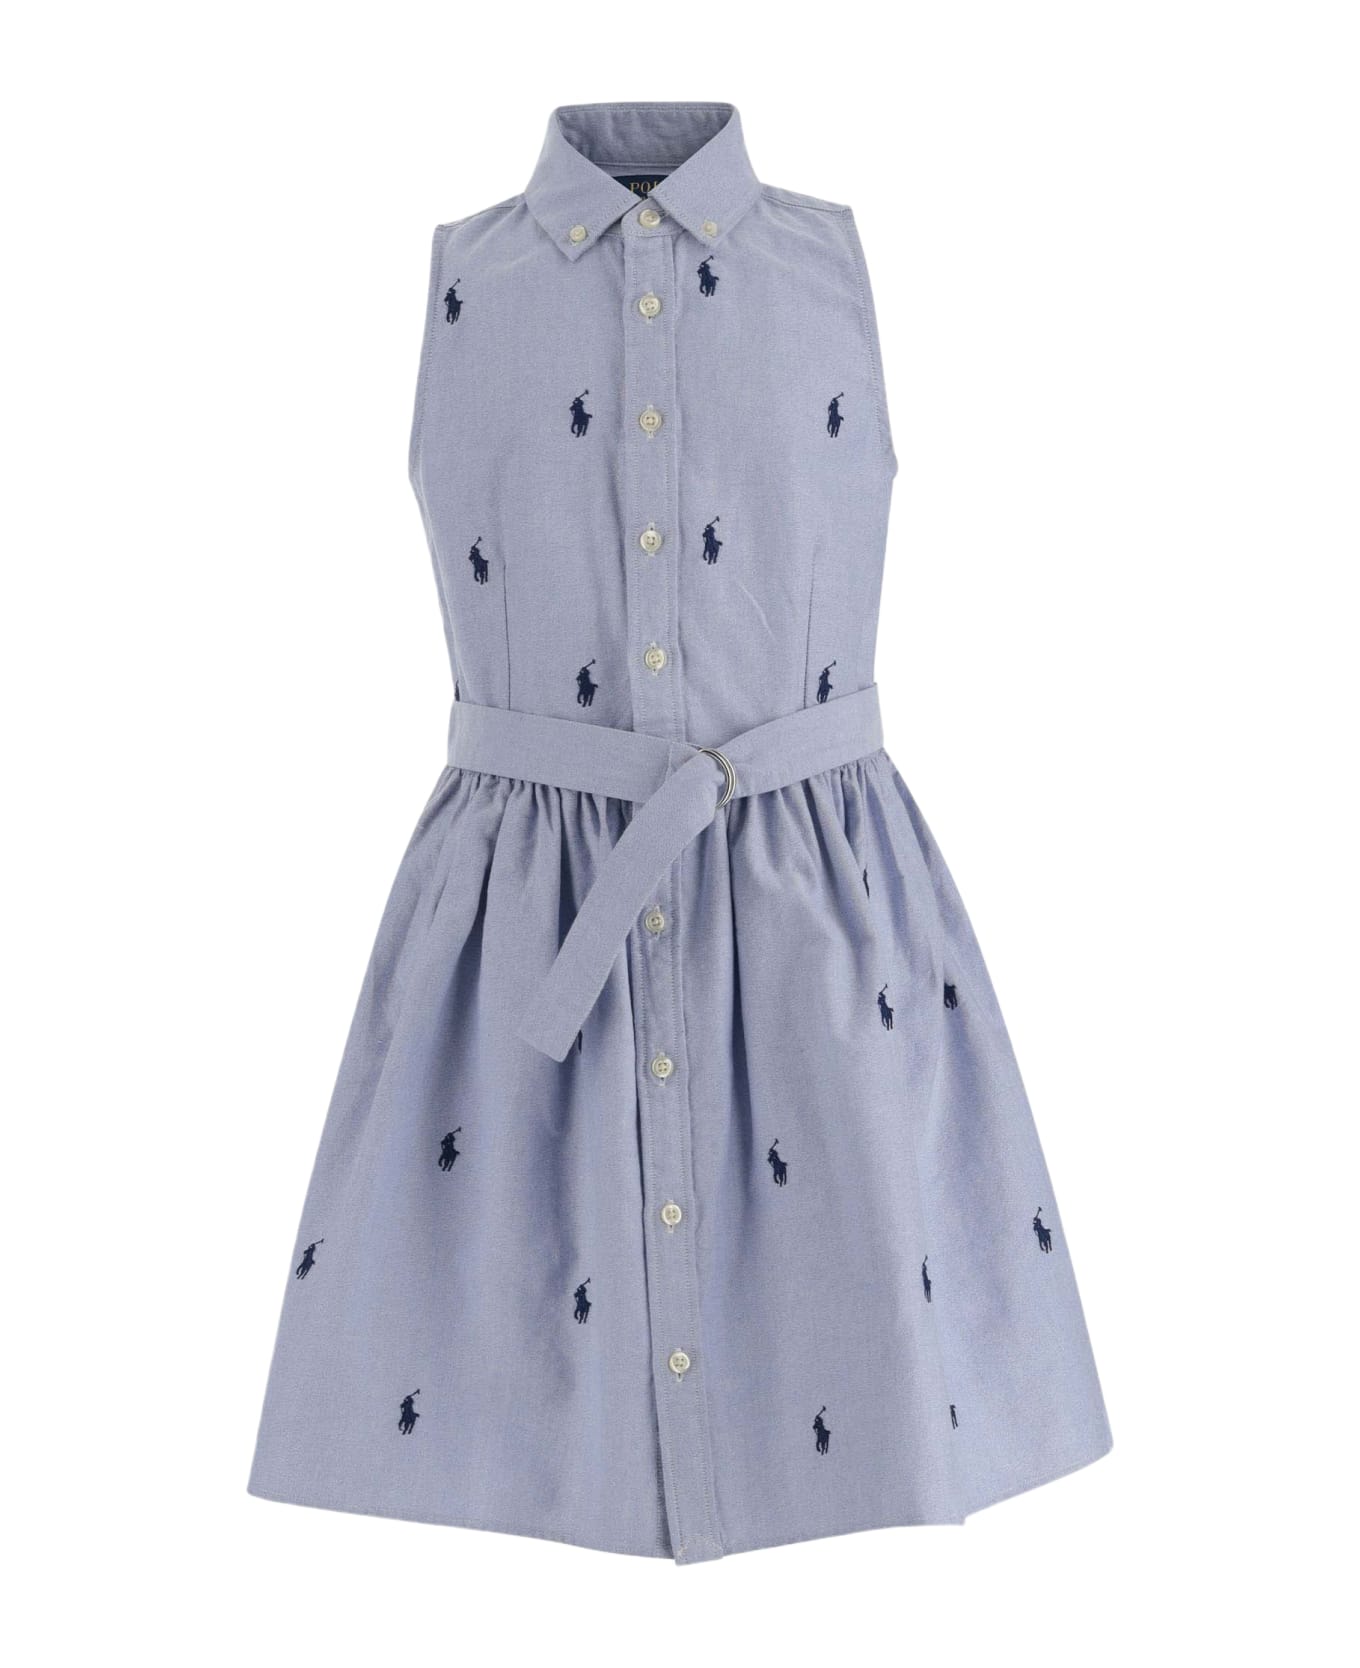 Polo Ralph Lauren Cotton Dress With All-over Logo - Blue ジャンプスーツ